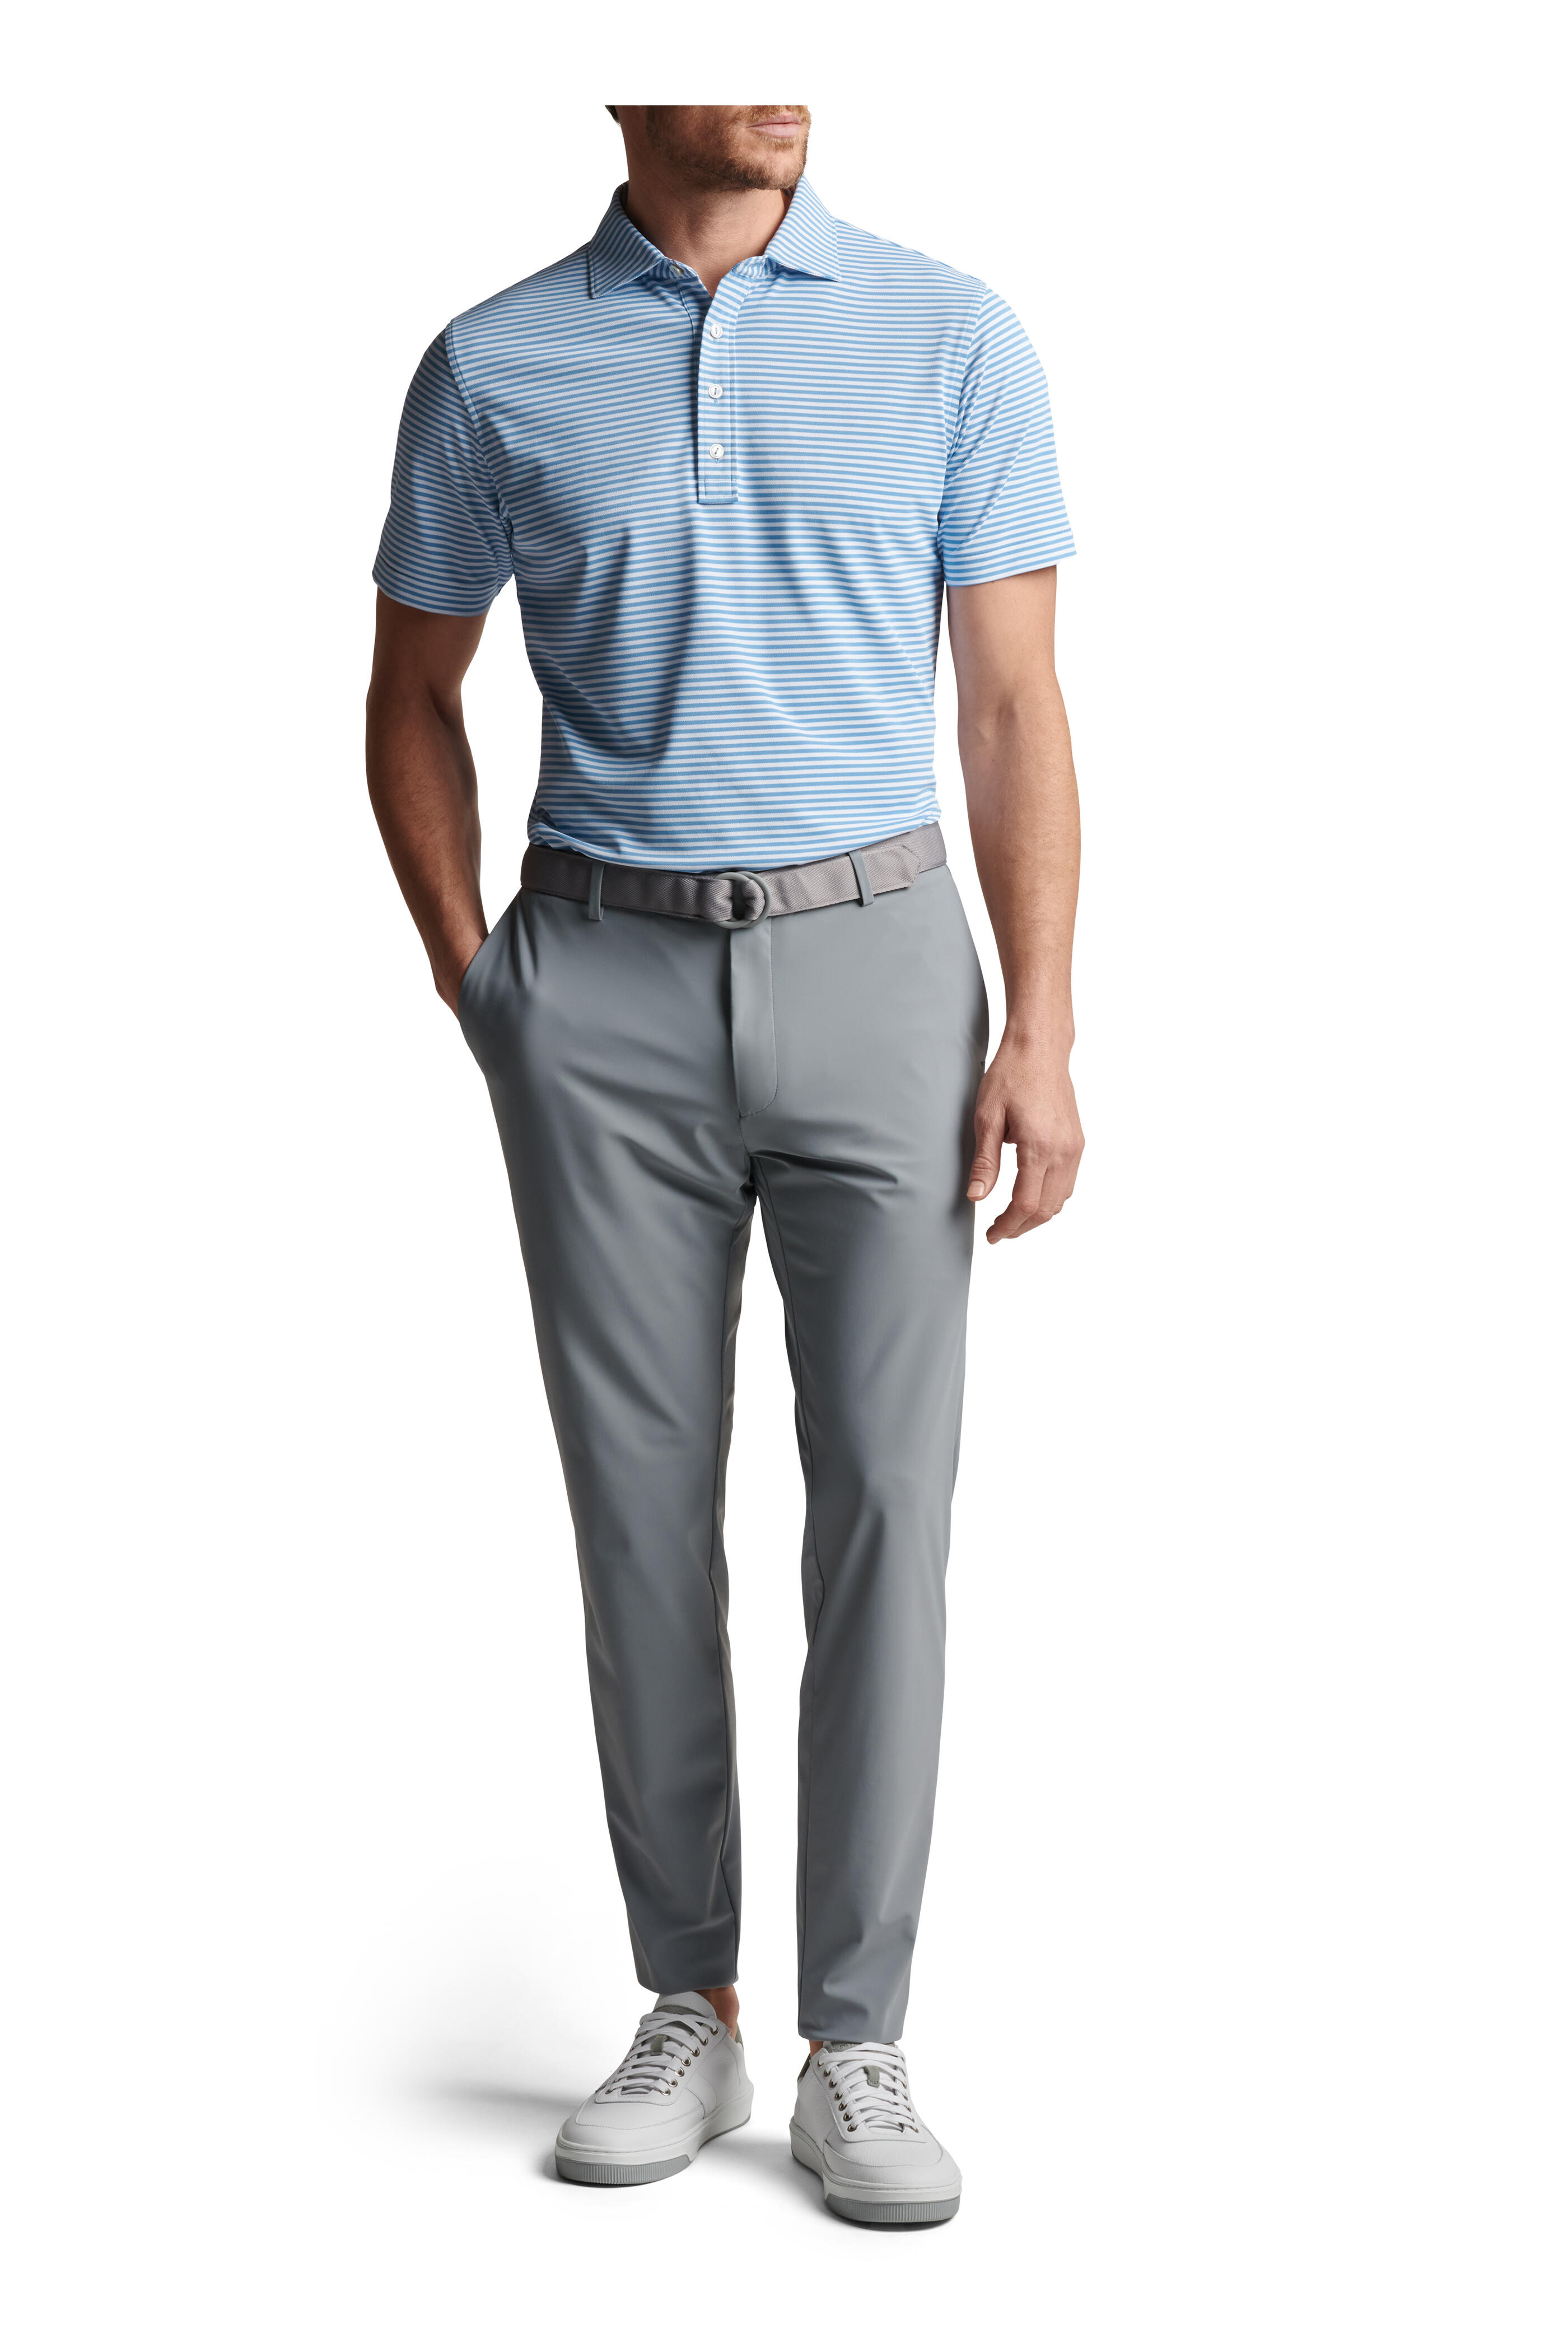 Peter Millar - Mood Channel Blue Striped Performance Mesh Polo